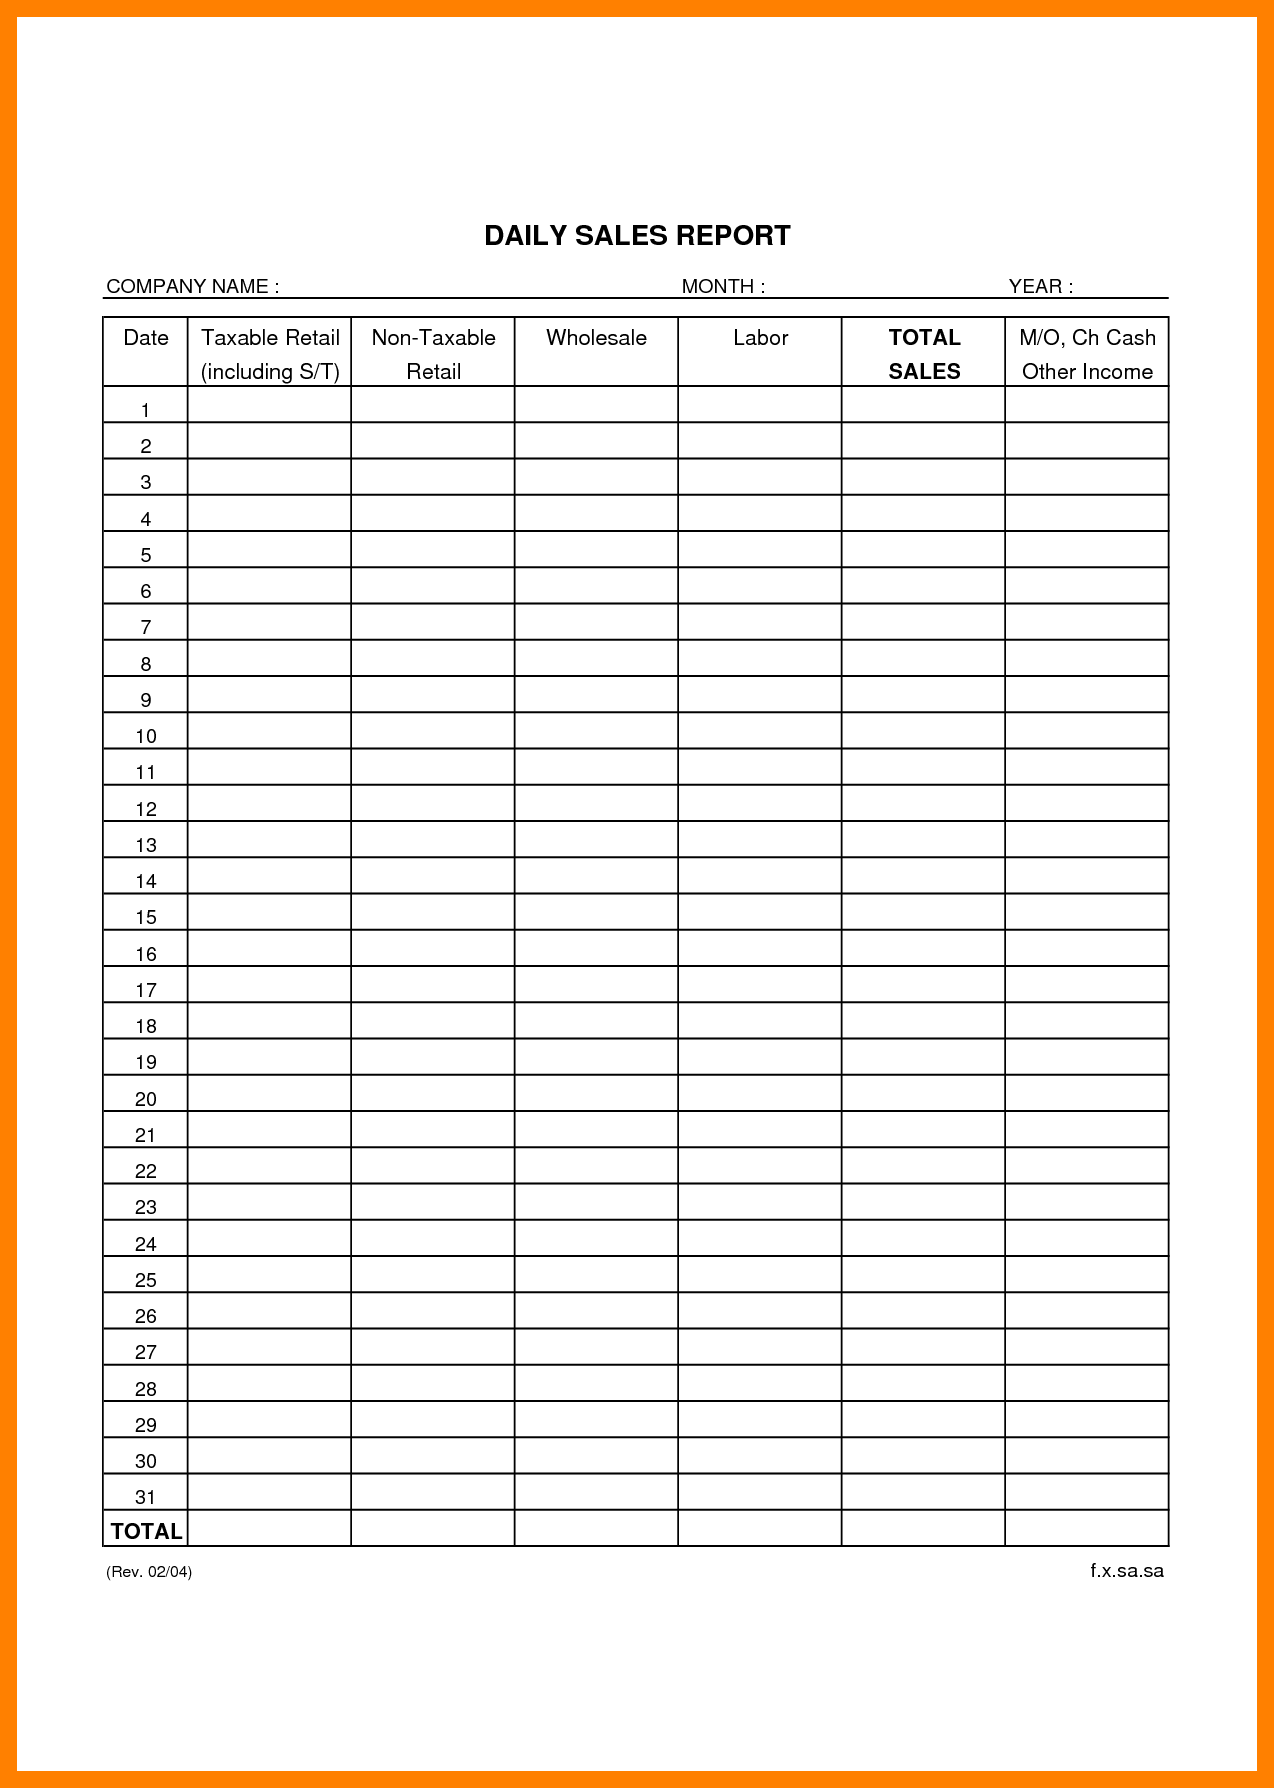 Example Of Daily Sales Report Format In Excel Throughout Daily Sales Report Format In Excel Printable